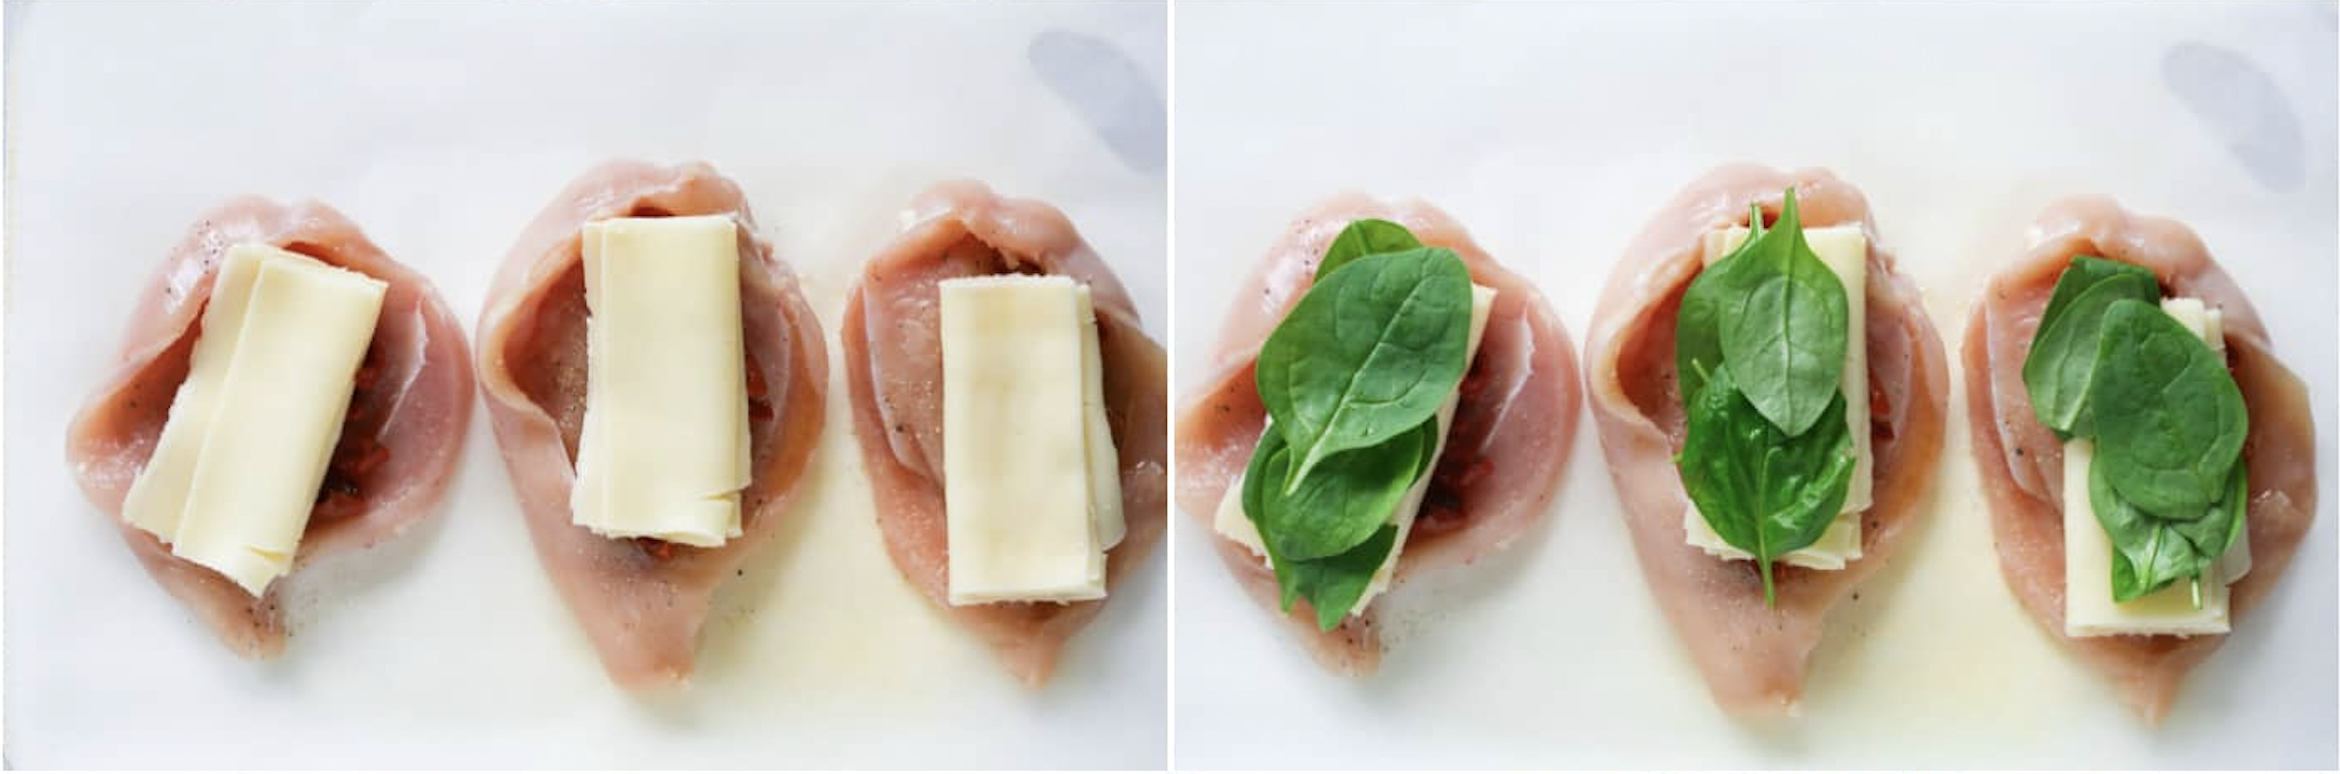 Left: cheese added to pocket. Right: spinach added to pocket in chicken. 